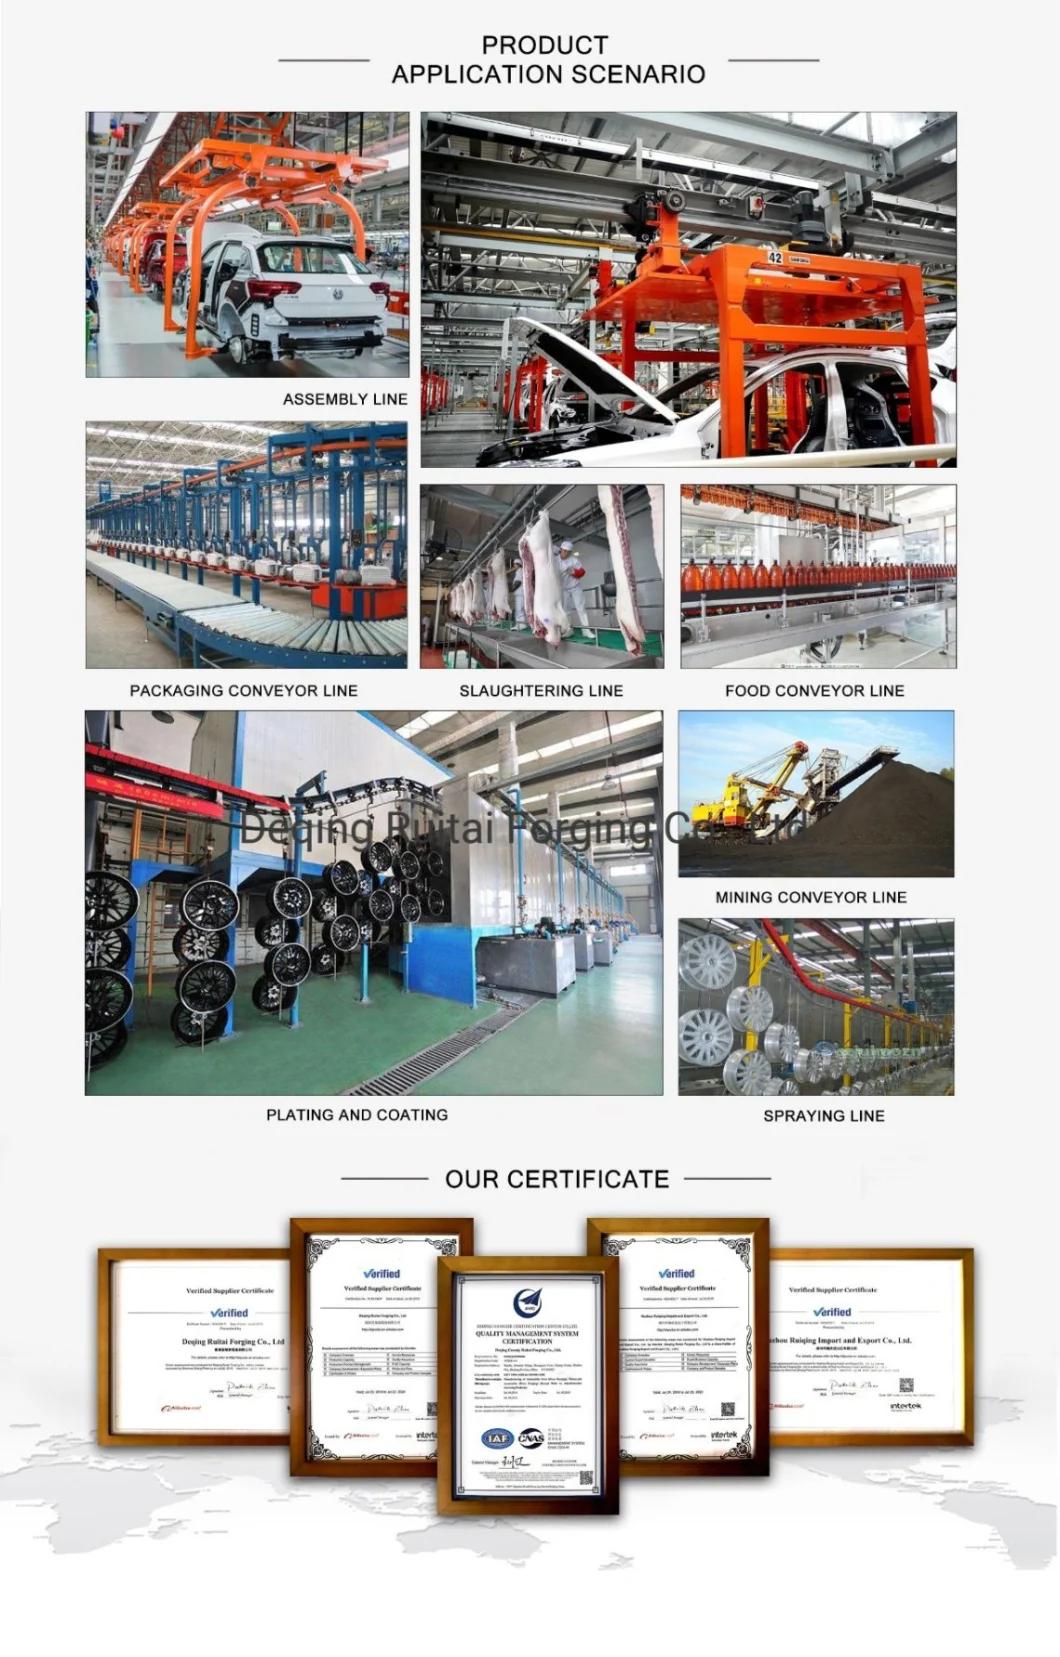 China Factory of Drop Forged Overhead Monorail I Beam Conveyor Bracket Chain Trolley Pulley with Roller Bearing for Powder Painting and Coating Line